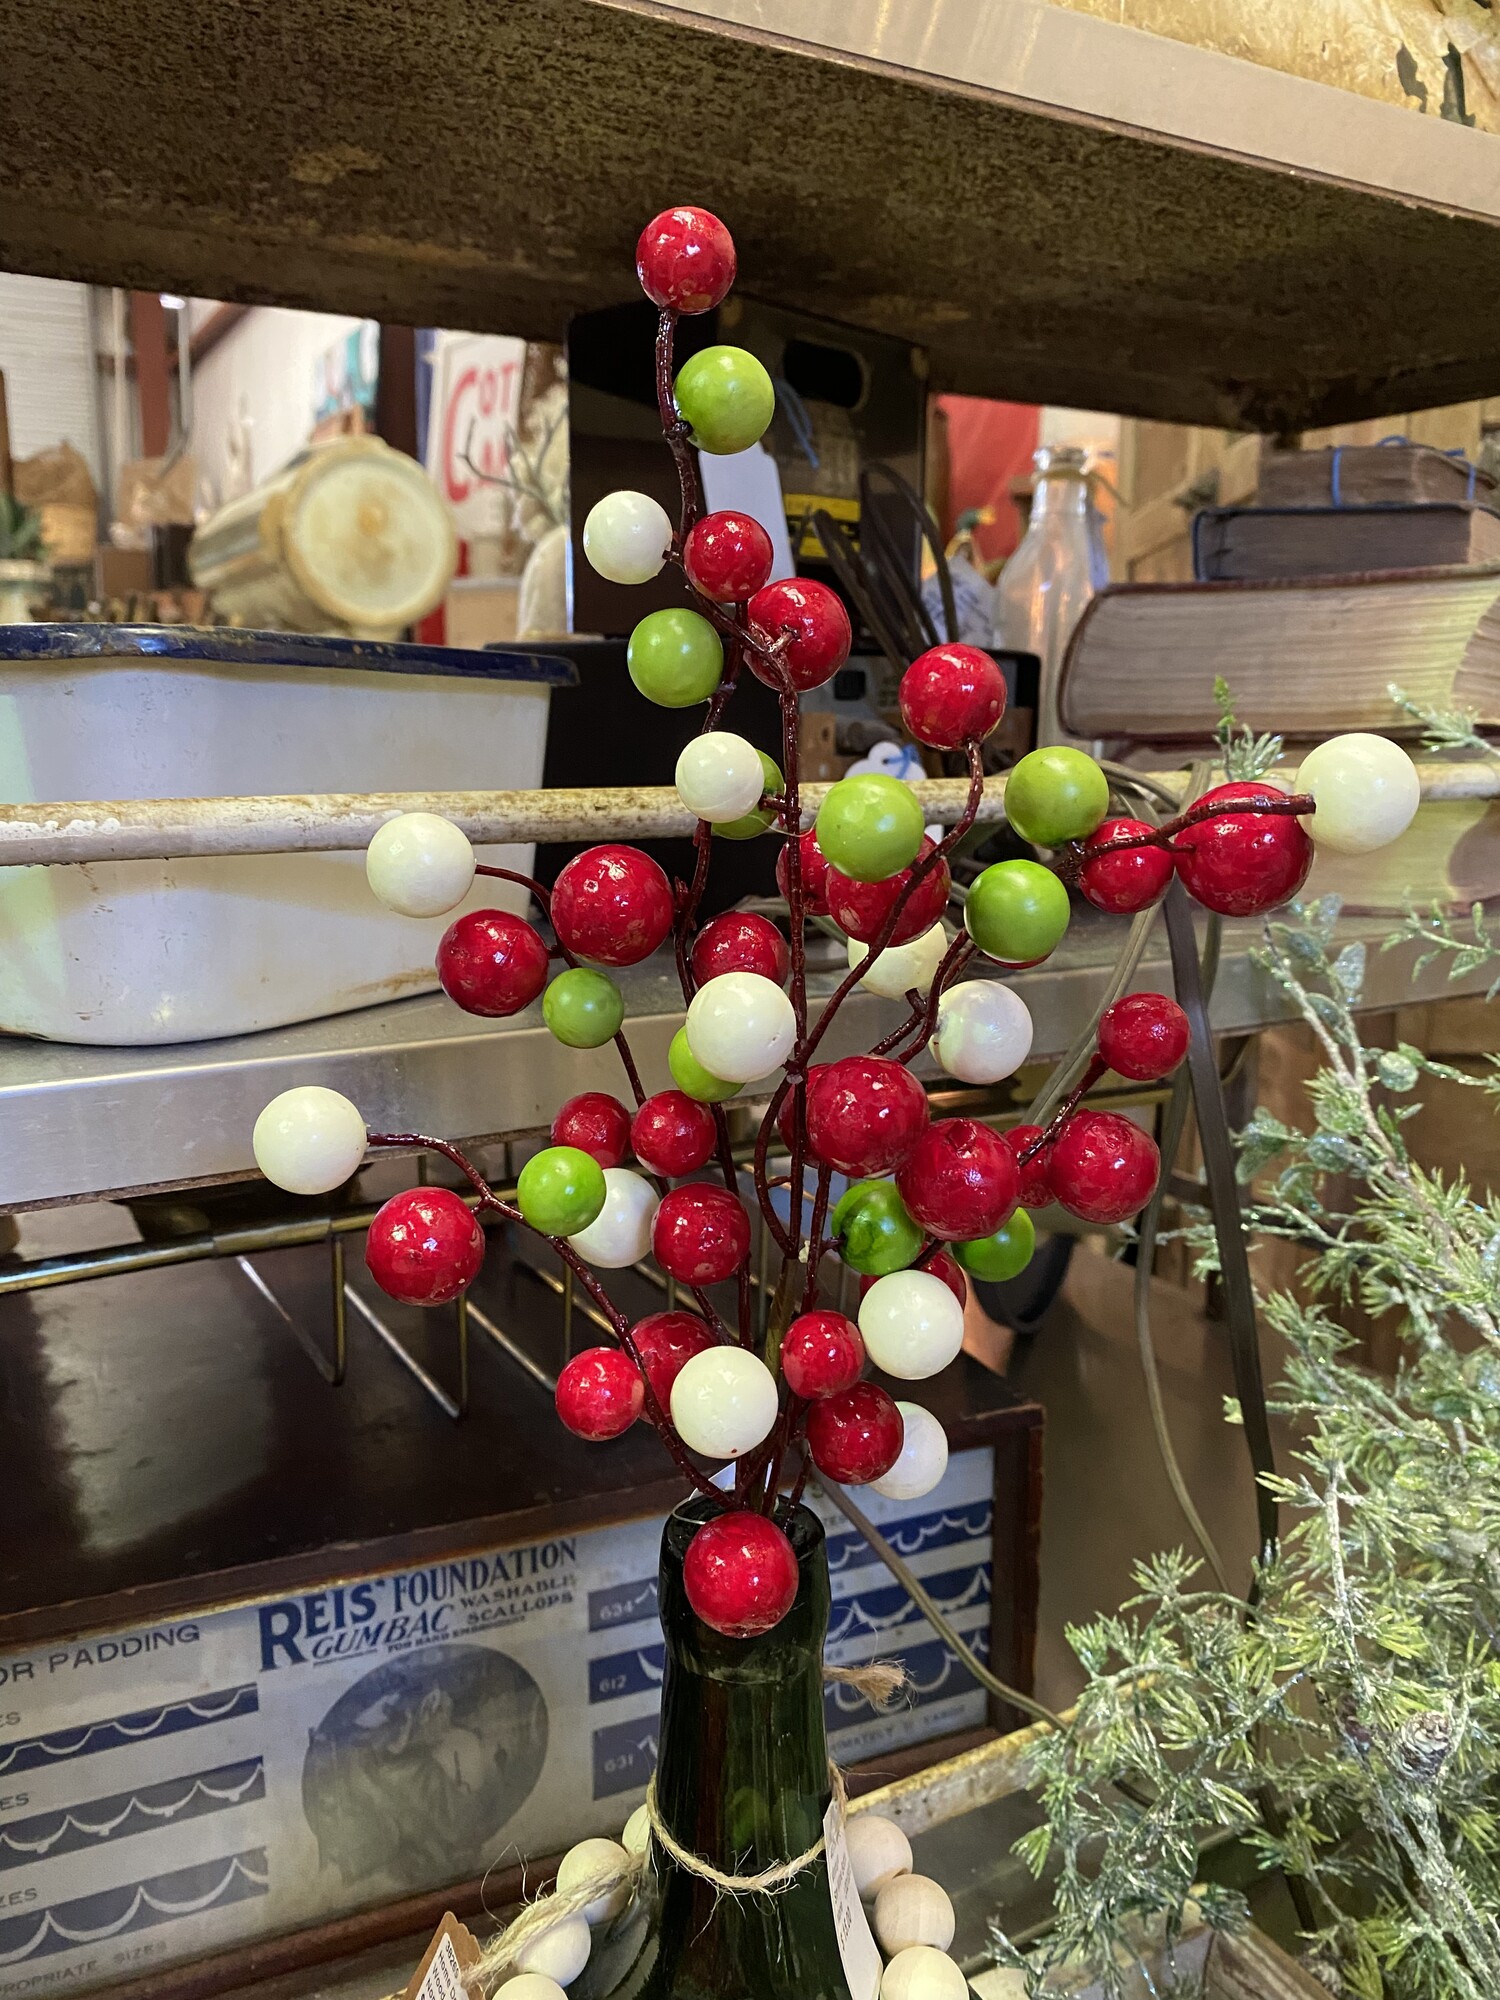 This stem measures 16 inches in length and has large red, white and green berries.  Stem looks great on its own or in an arrangement